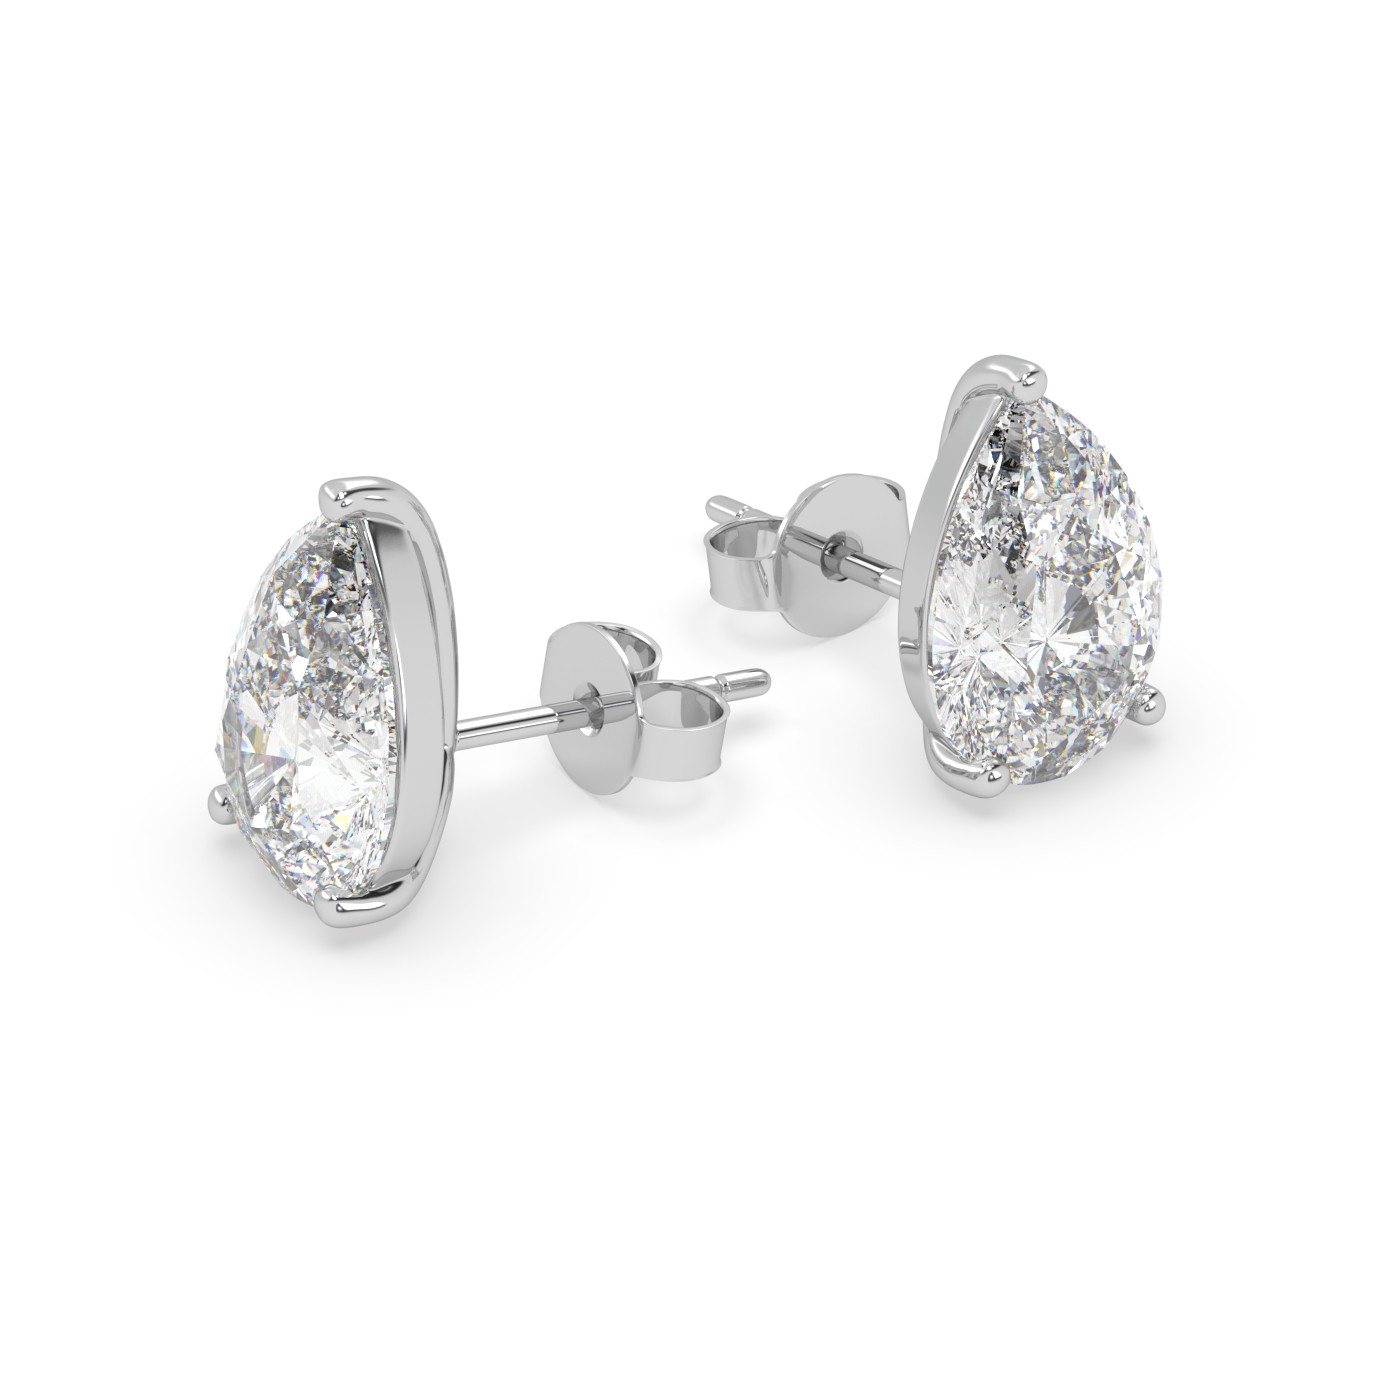 18k white gold 3.5 carat pear stud earrings with butterfly back